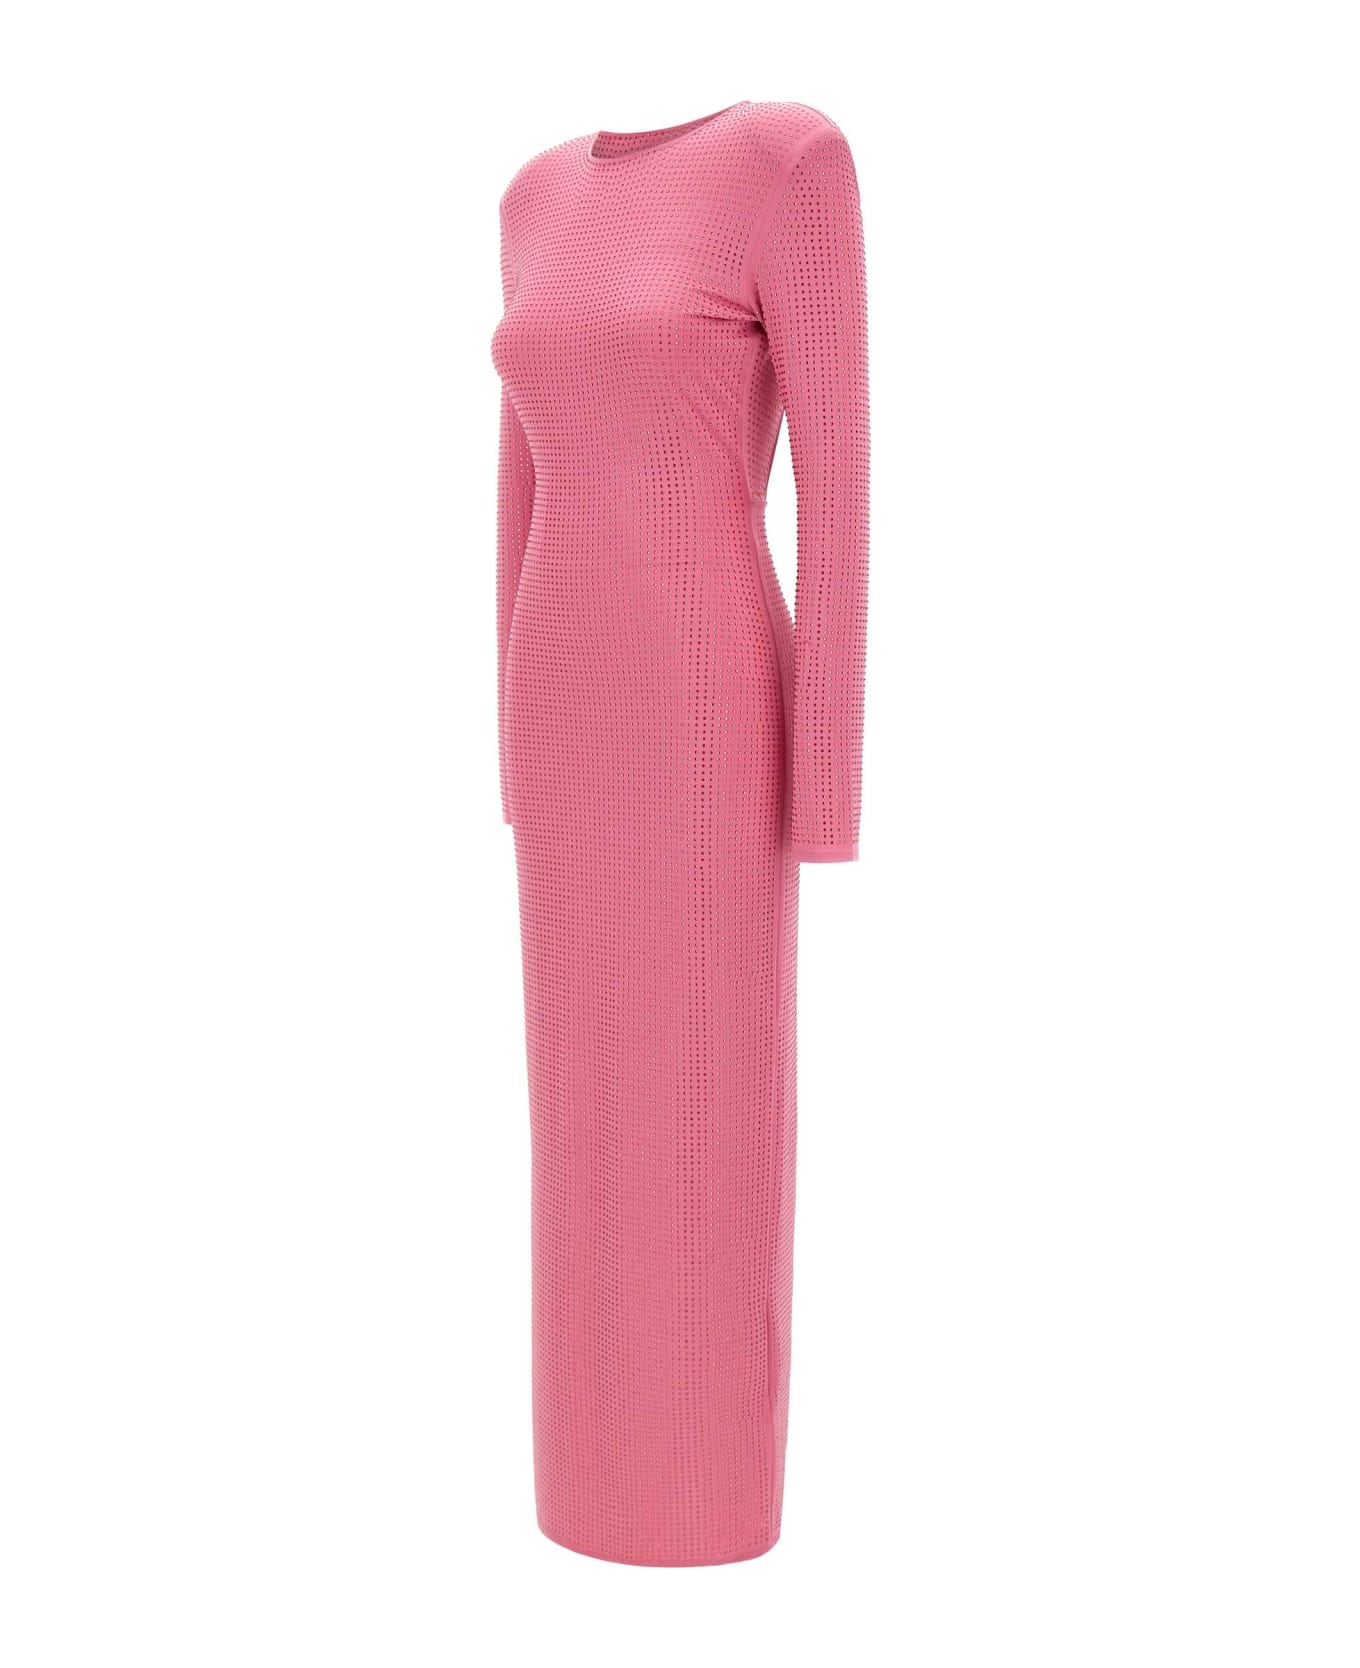 Rotate by Birger Christensen "embellished Fitted" Dress - PINK